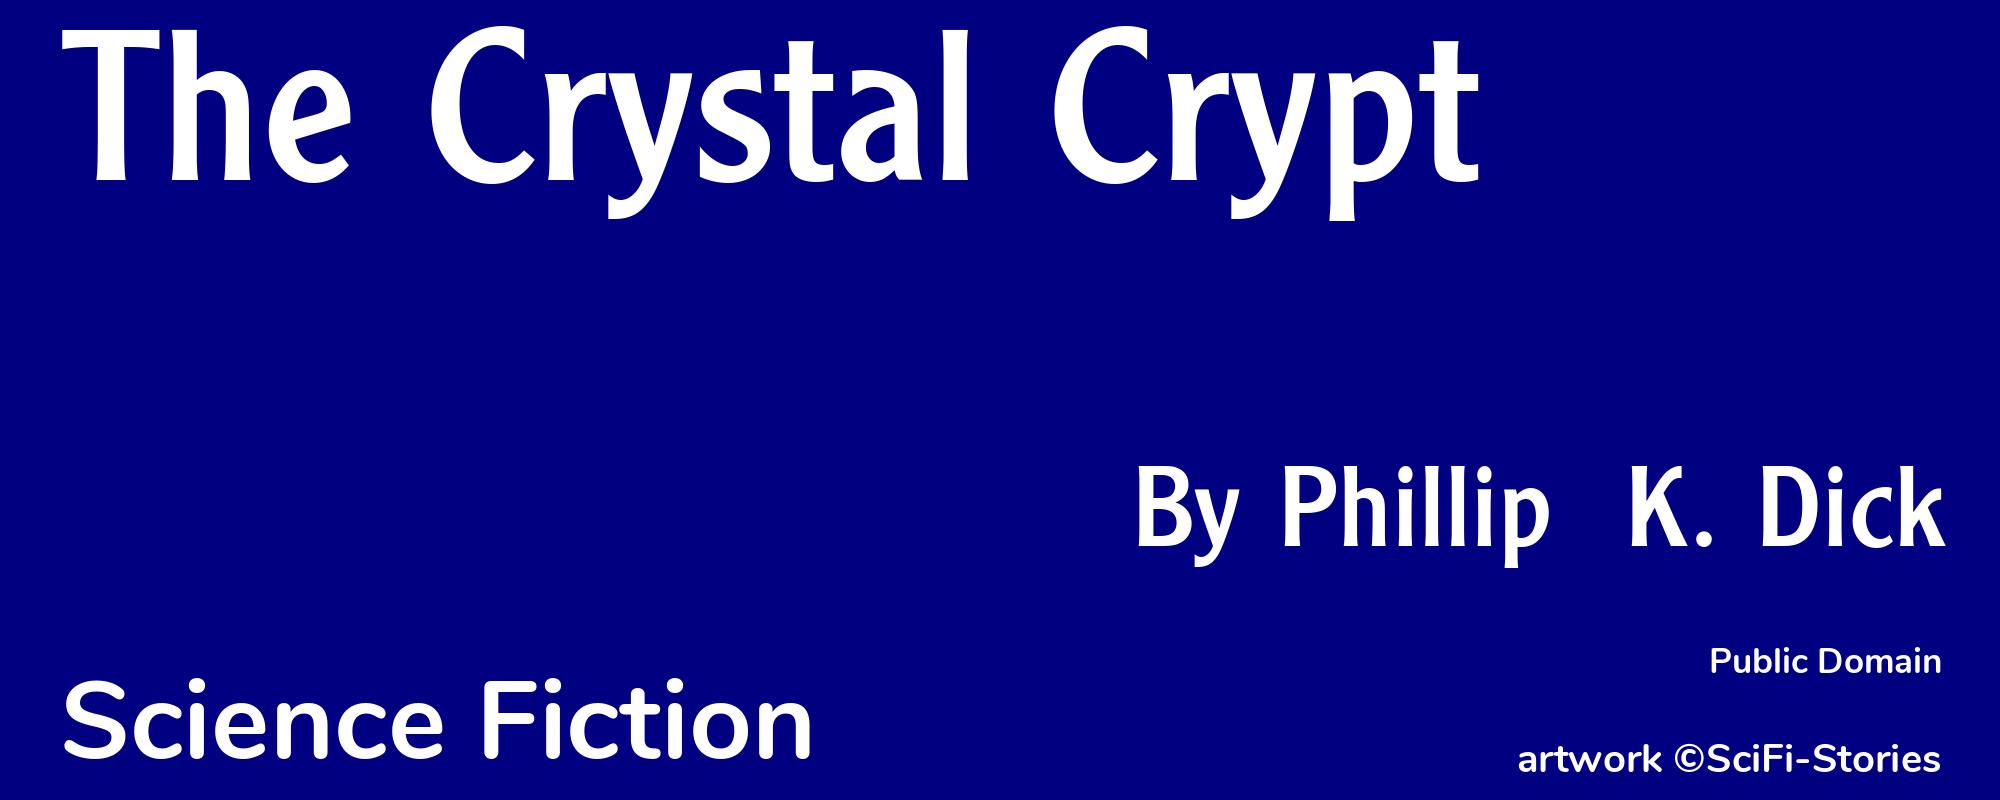 The Crystal Crypt - Cover